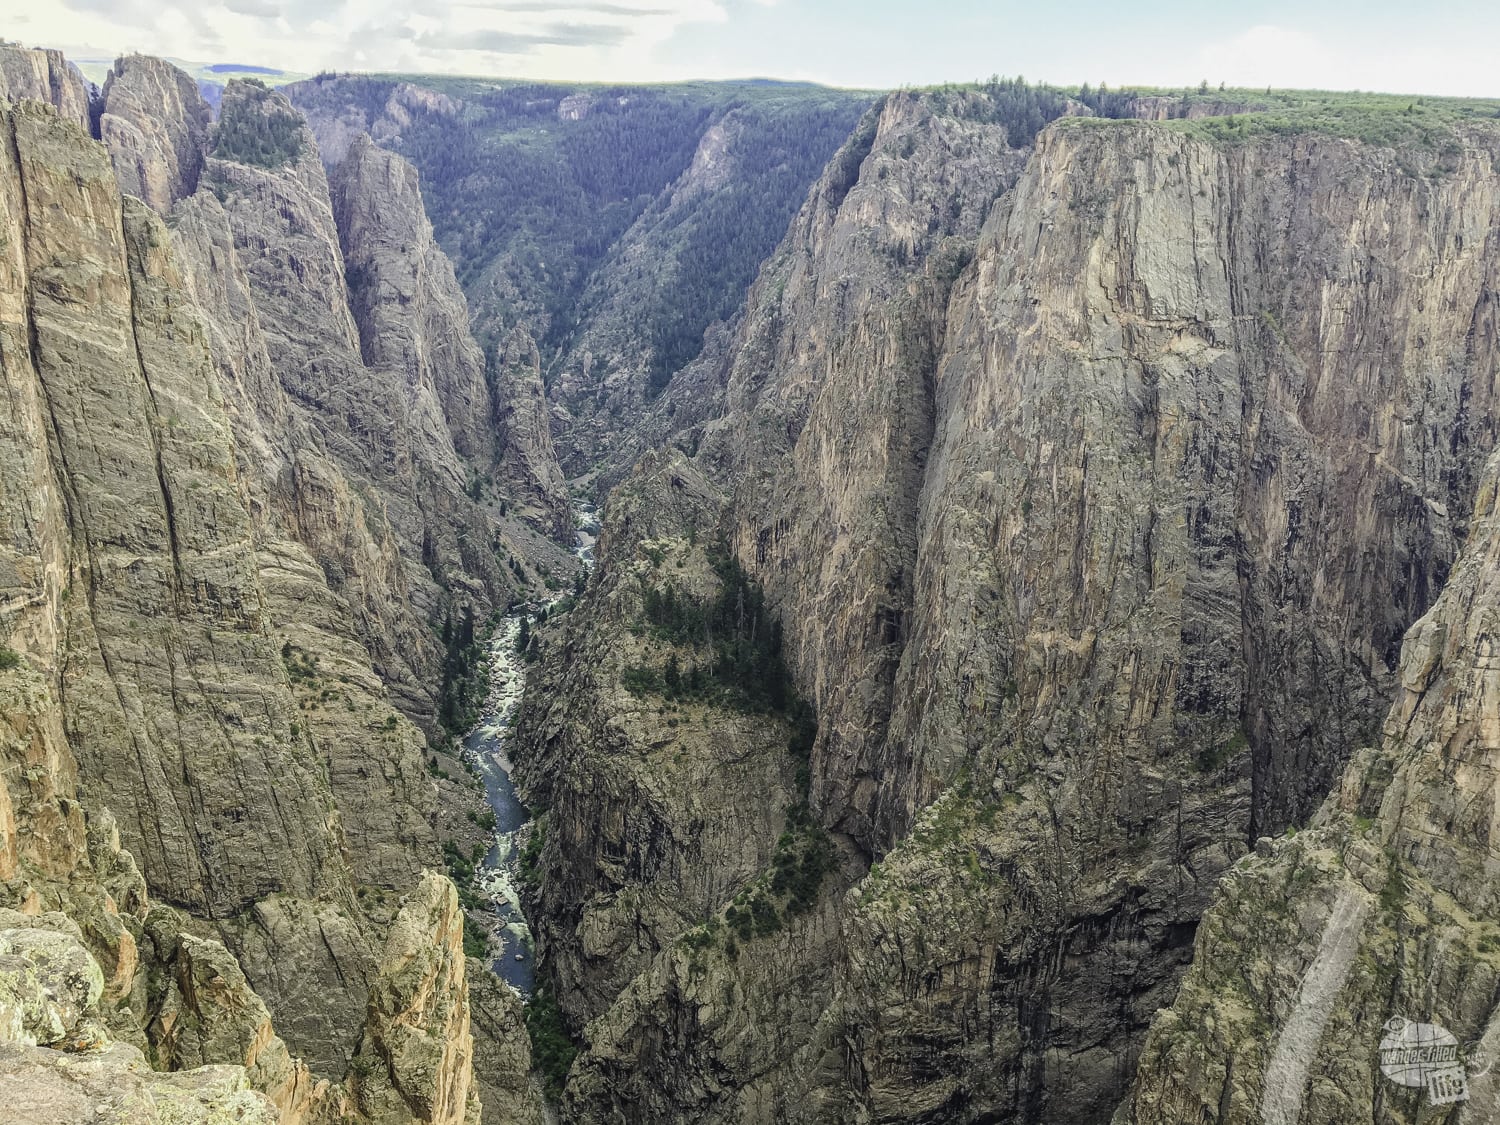 North Rim of Black Canyon of the Gunnison National Park. 